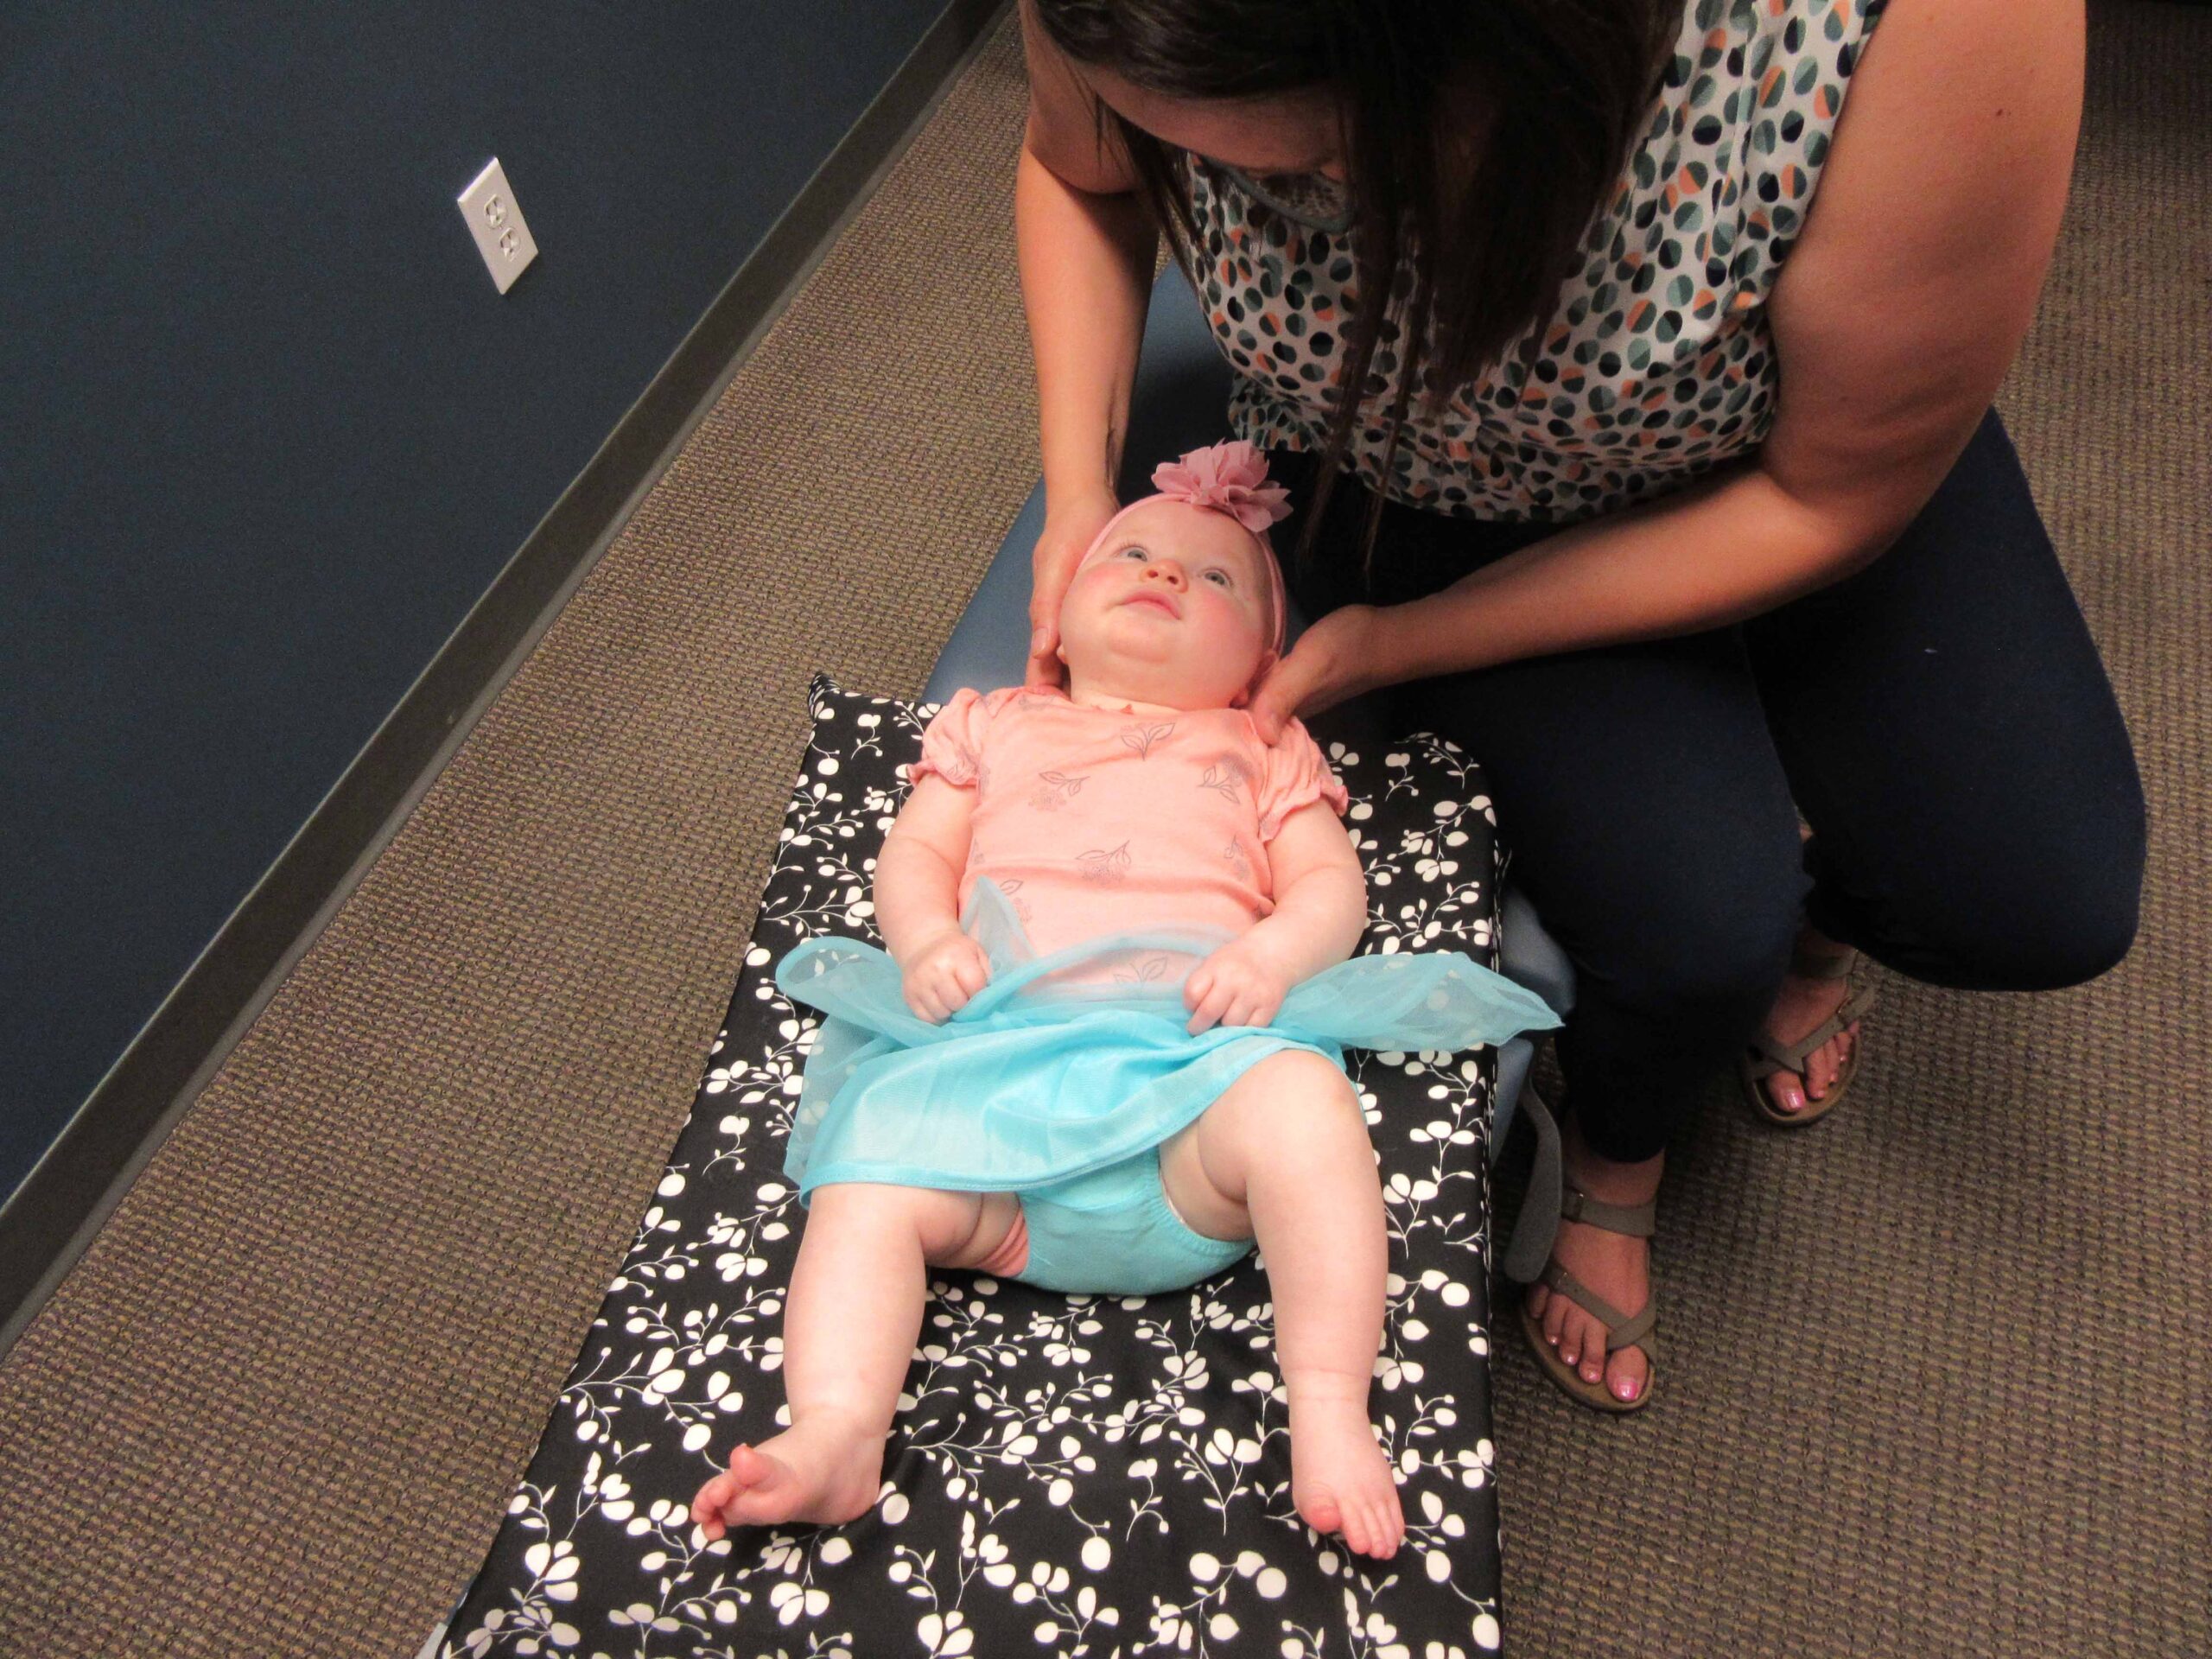 Baby Chiropractic Benefits – Health Care for Infants